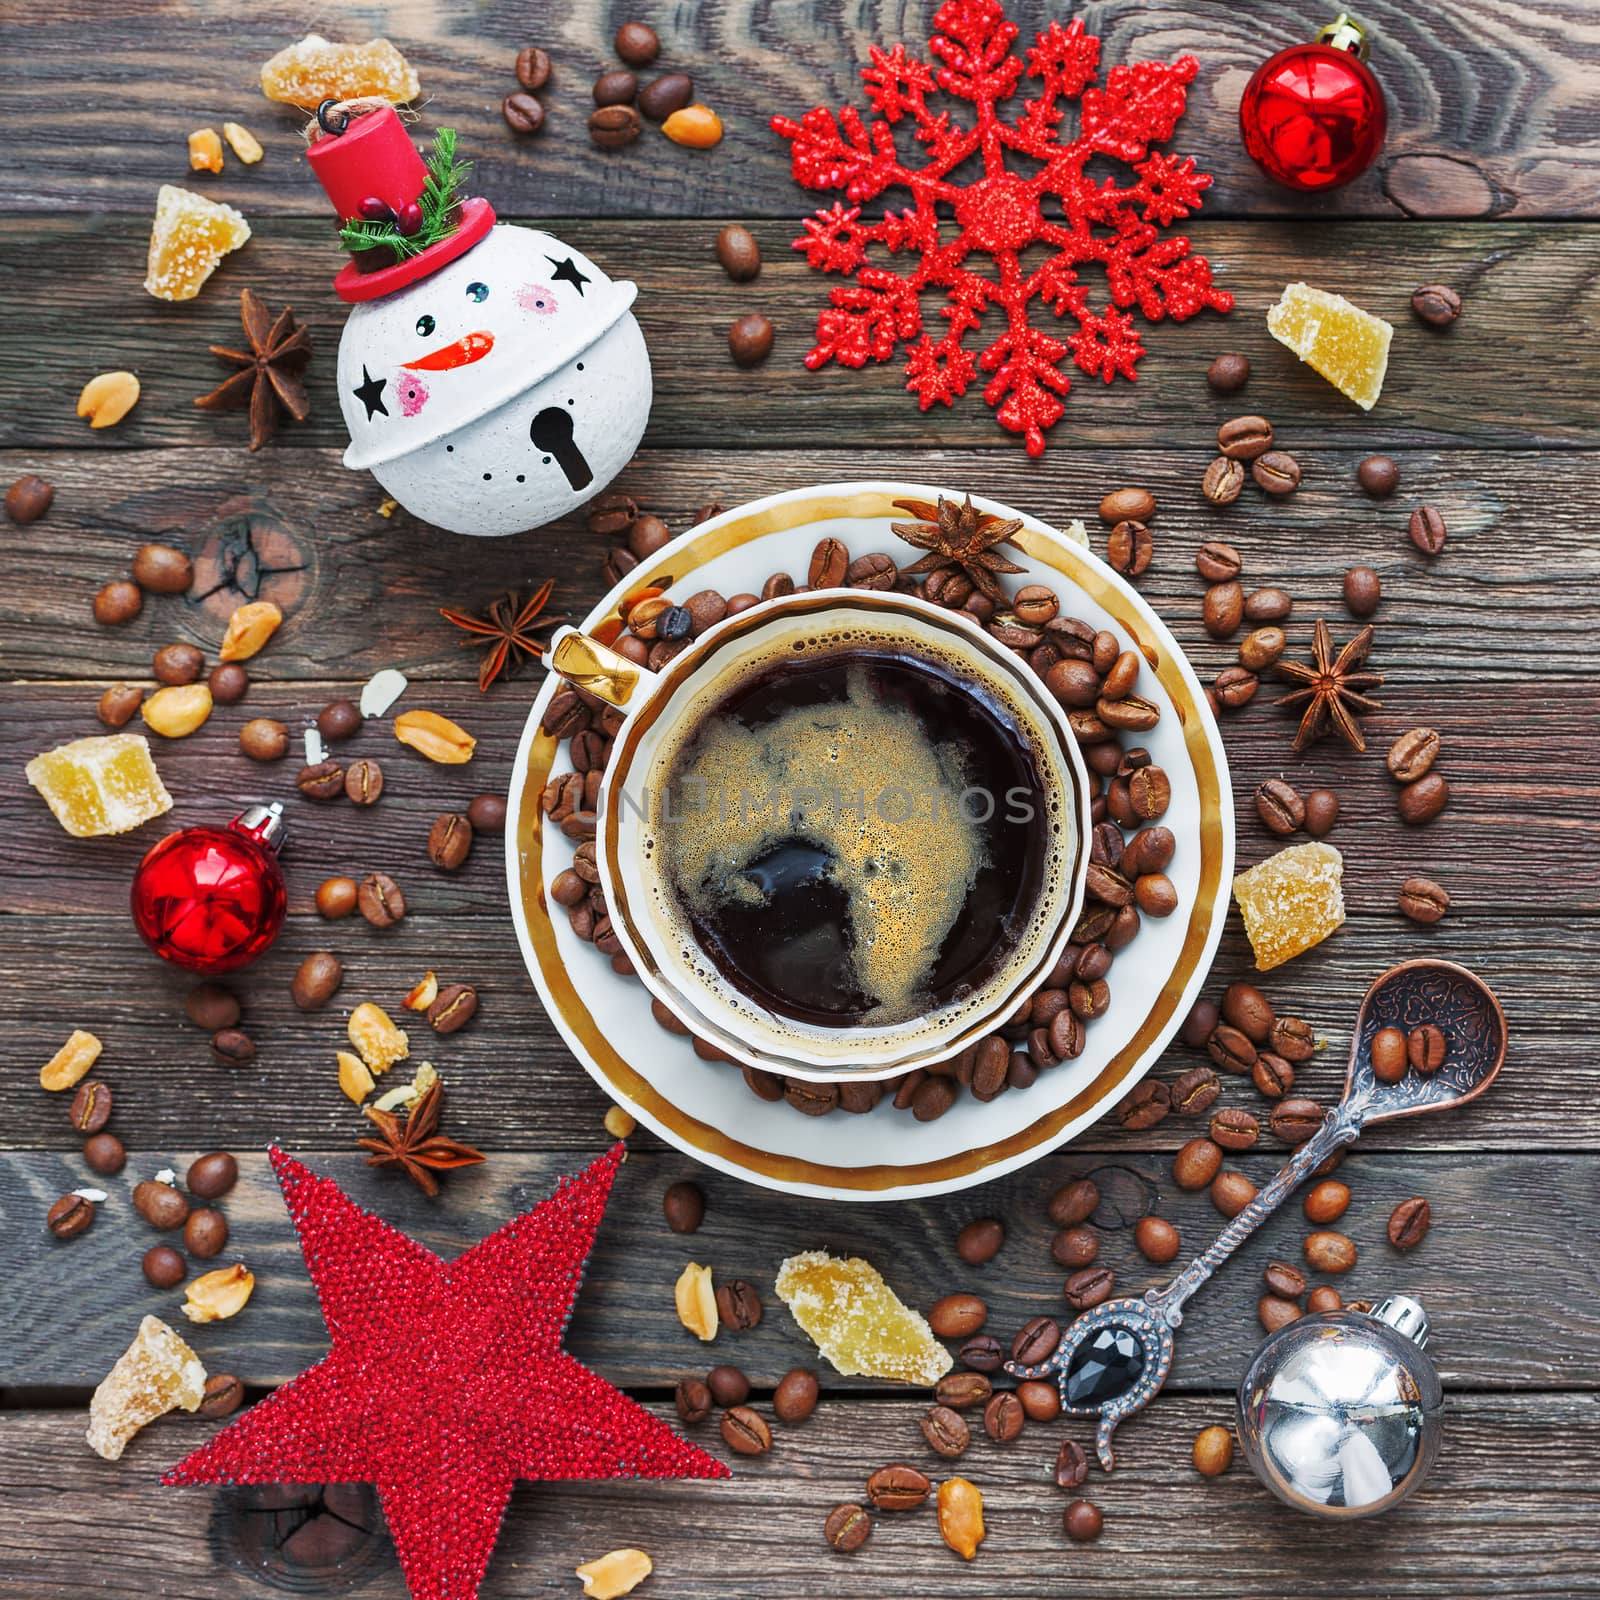 Rustic wooden background with cup of coffee and New Year decorations. White vintage dinnerware and spoon. Christmas beverage with ginger and anise. Top view